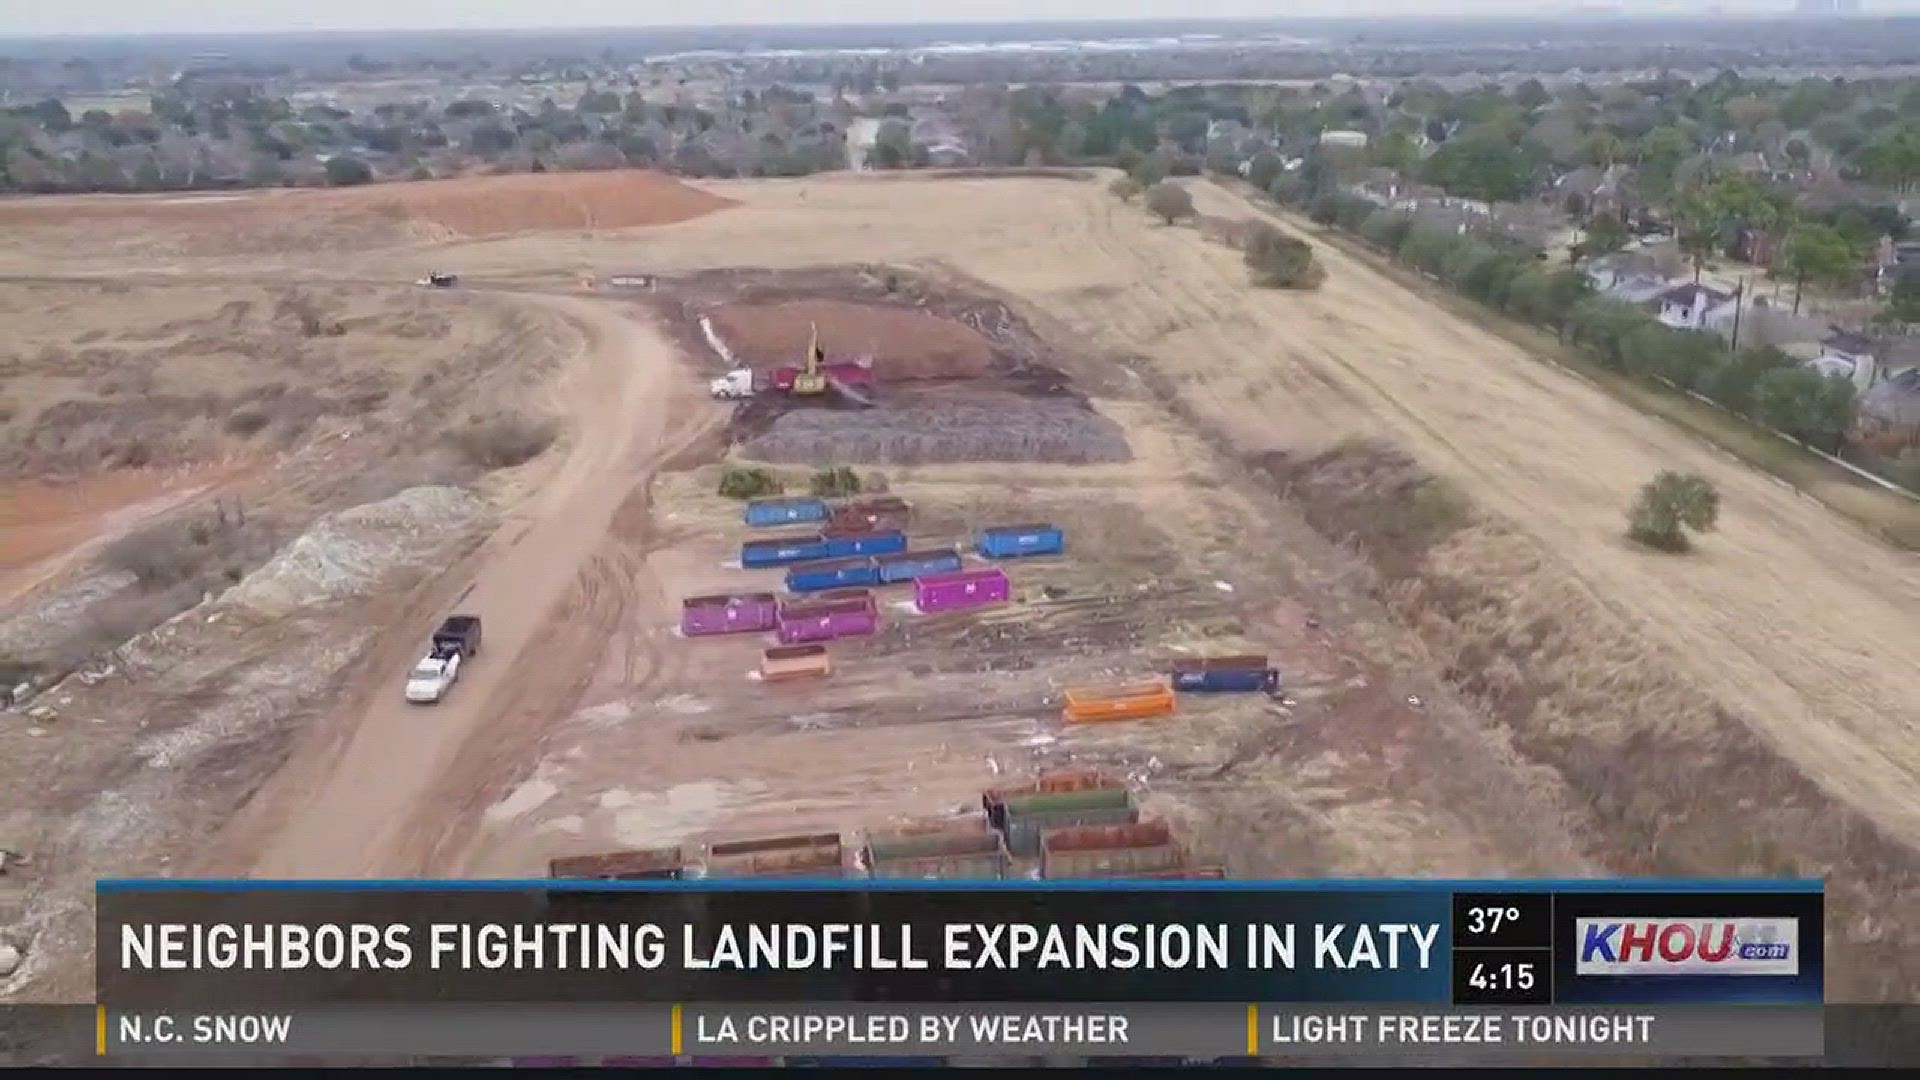 Neighbors are fighting against a landfill expansion in Katy.